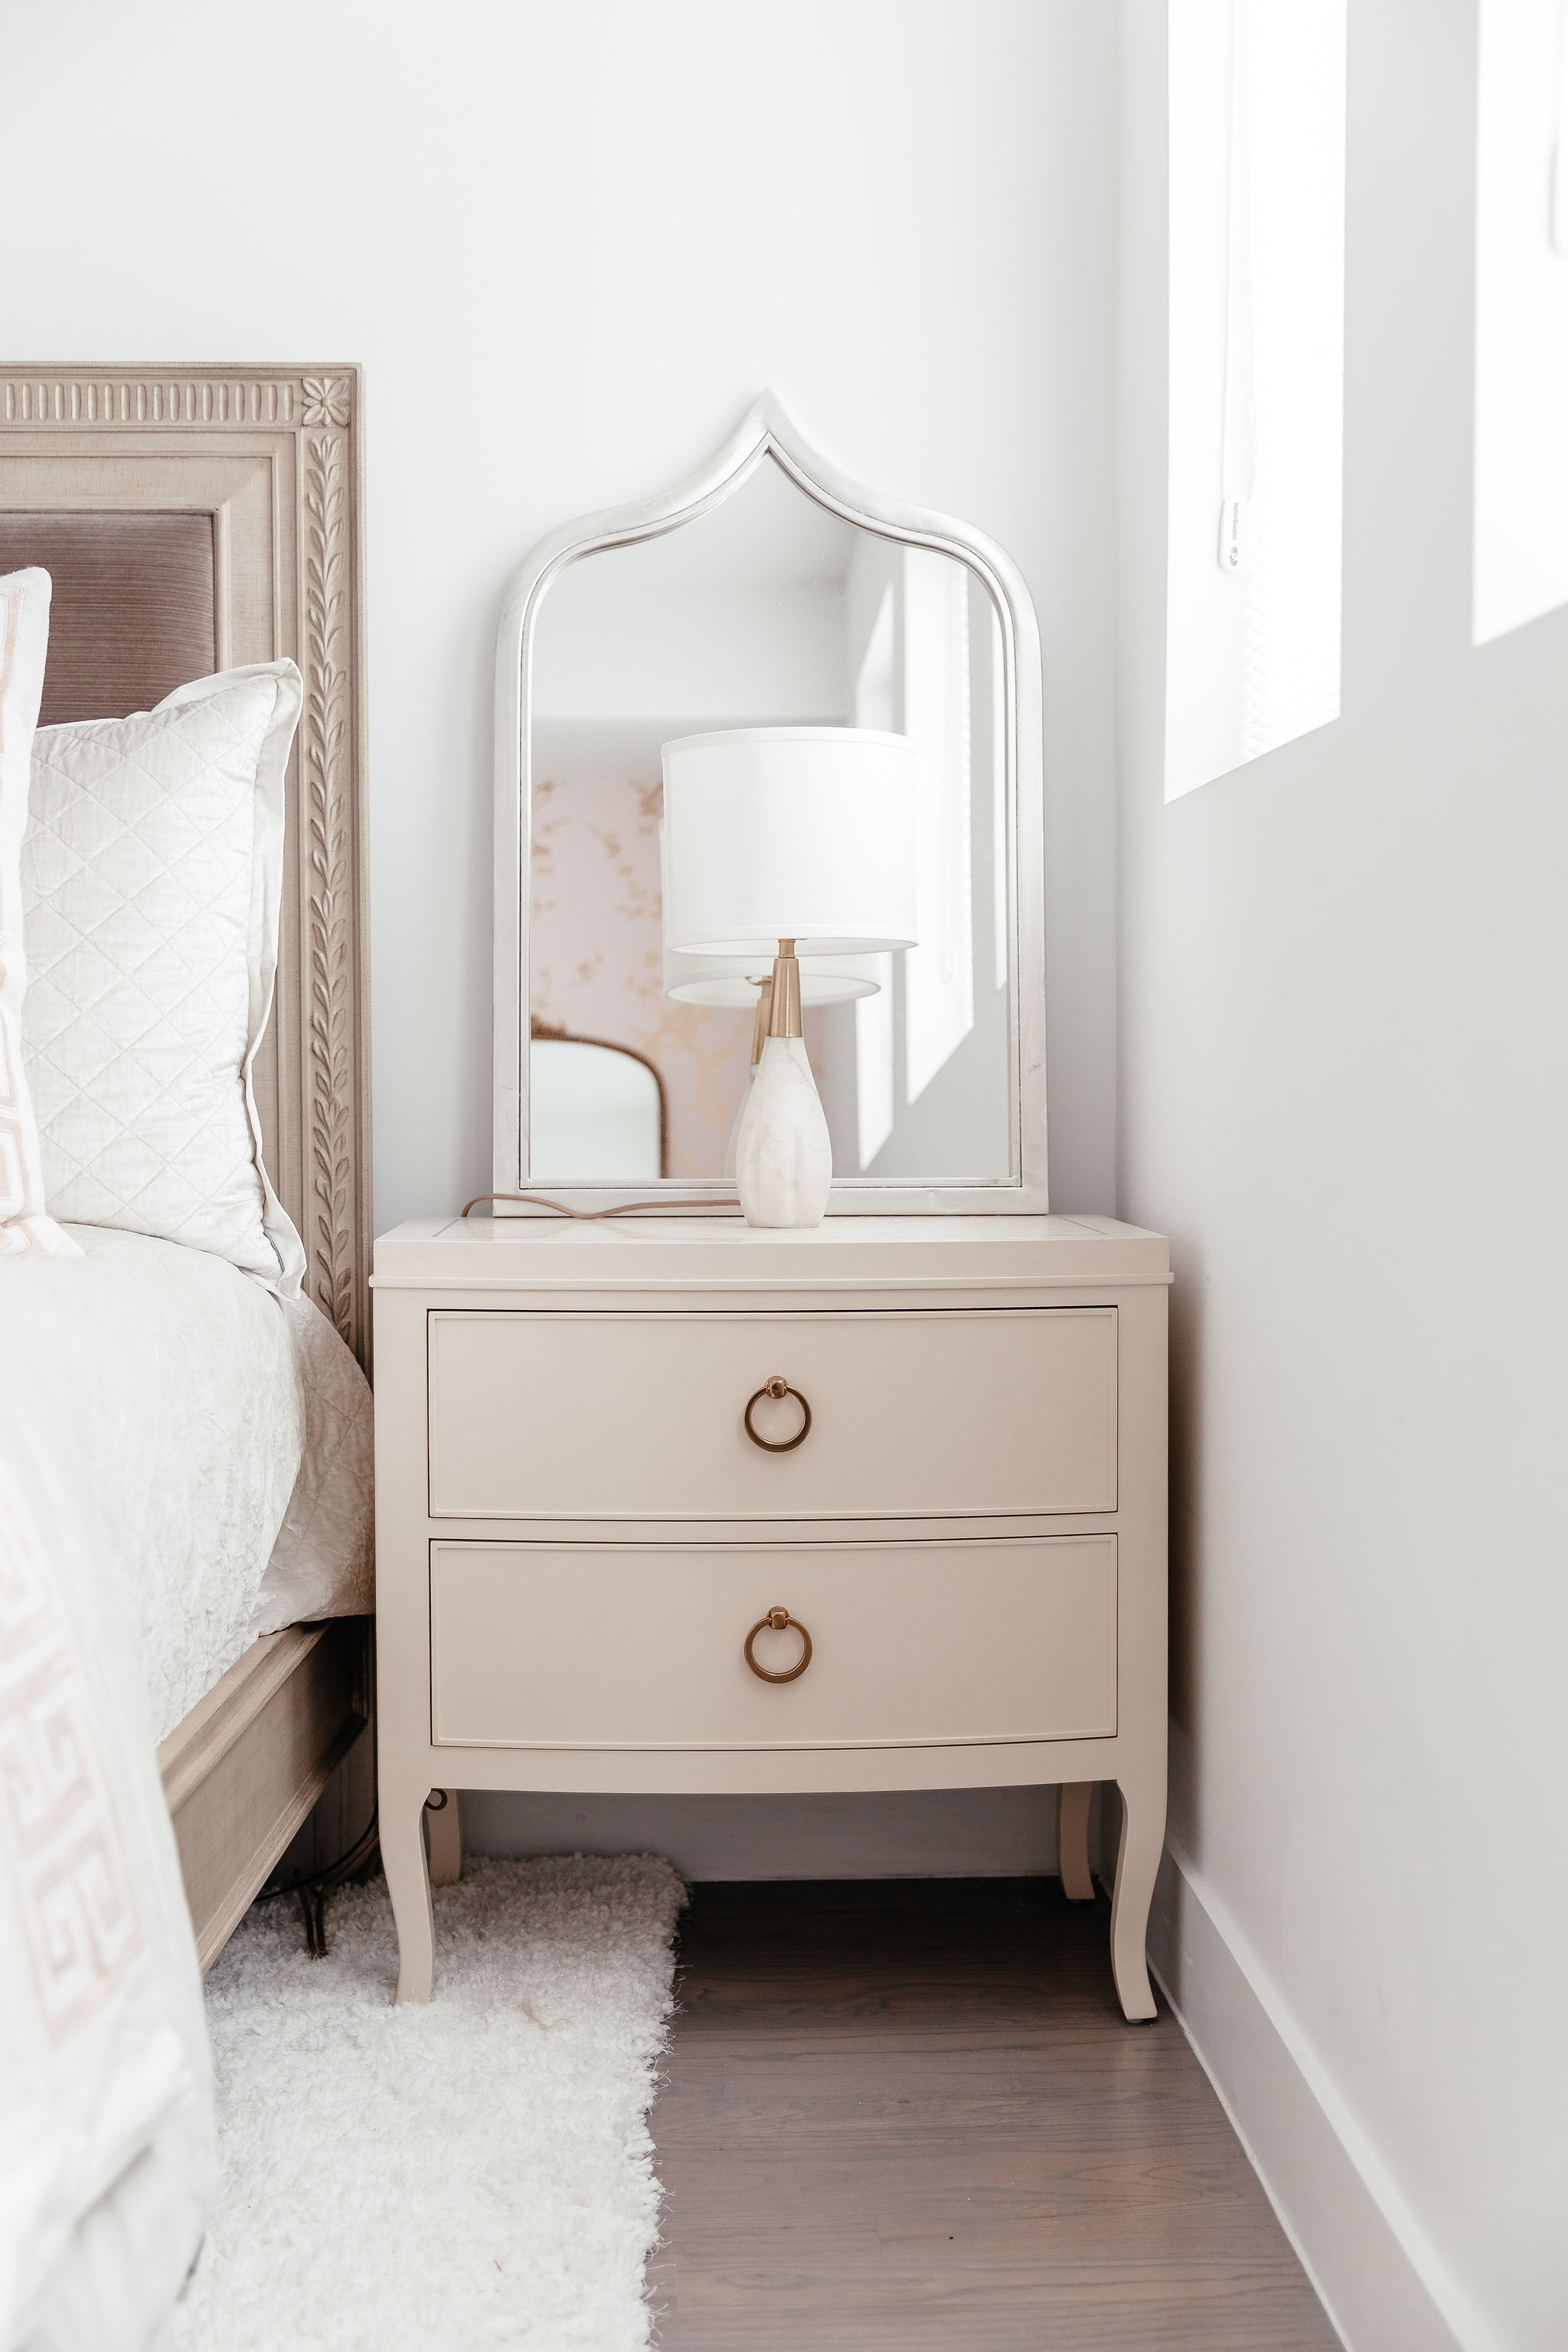 Dani Austin Kathy Kuo Home Dressers Bedroom Ideas French Country